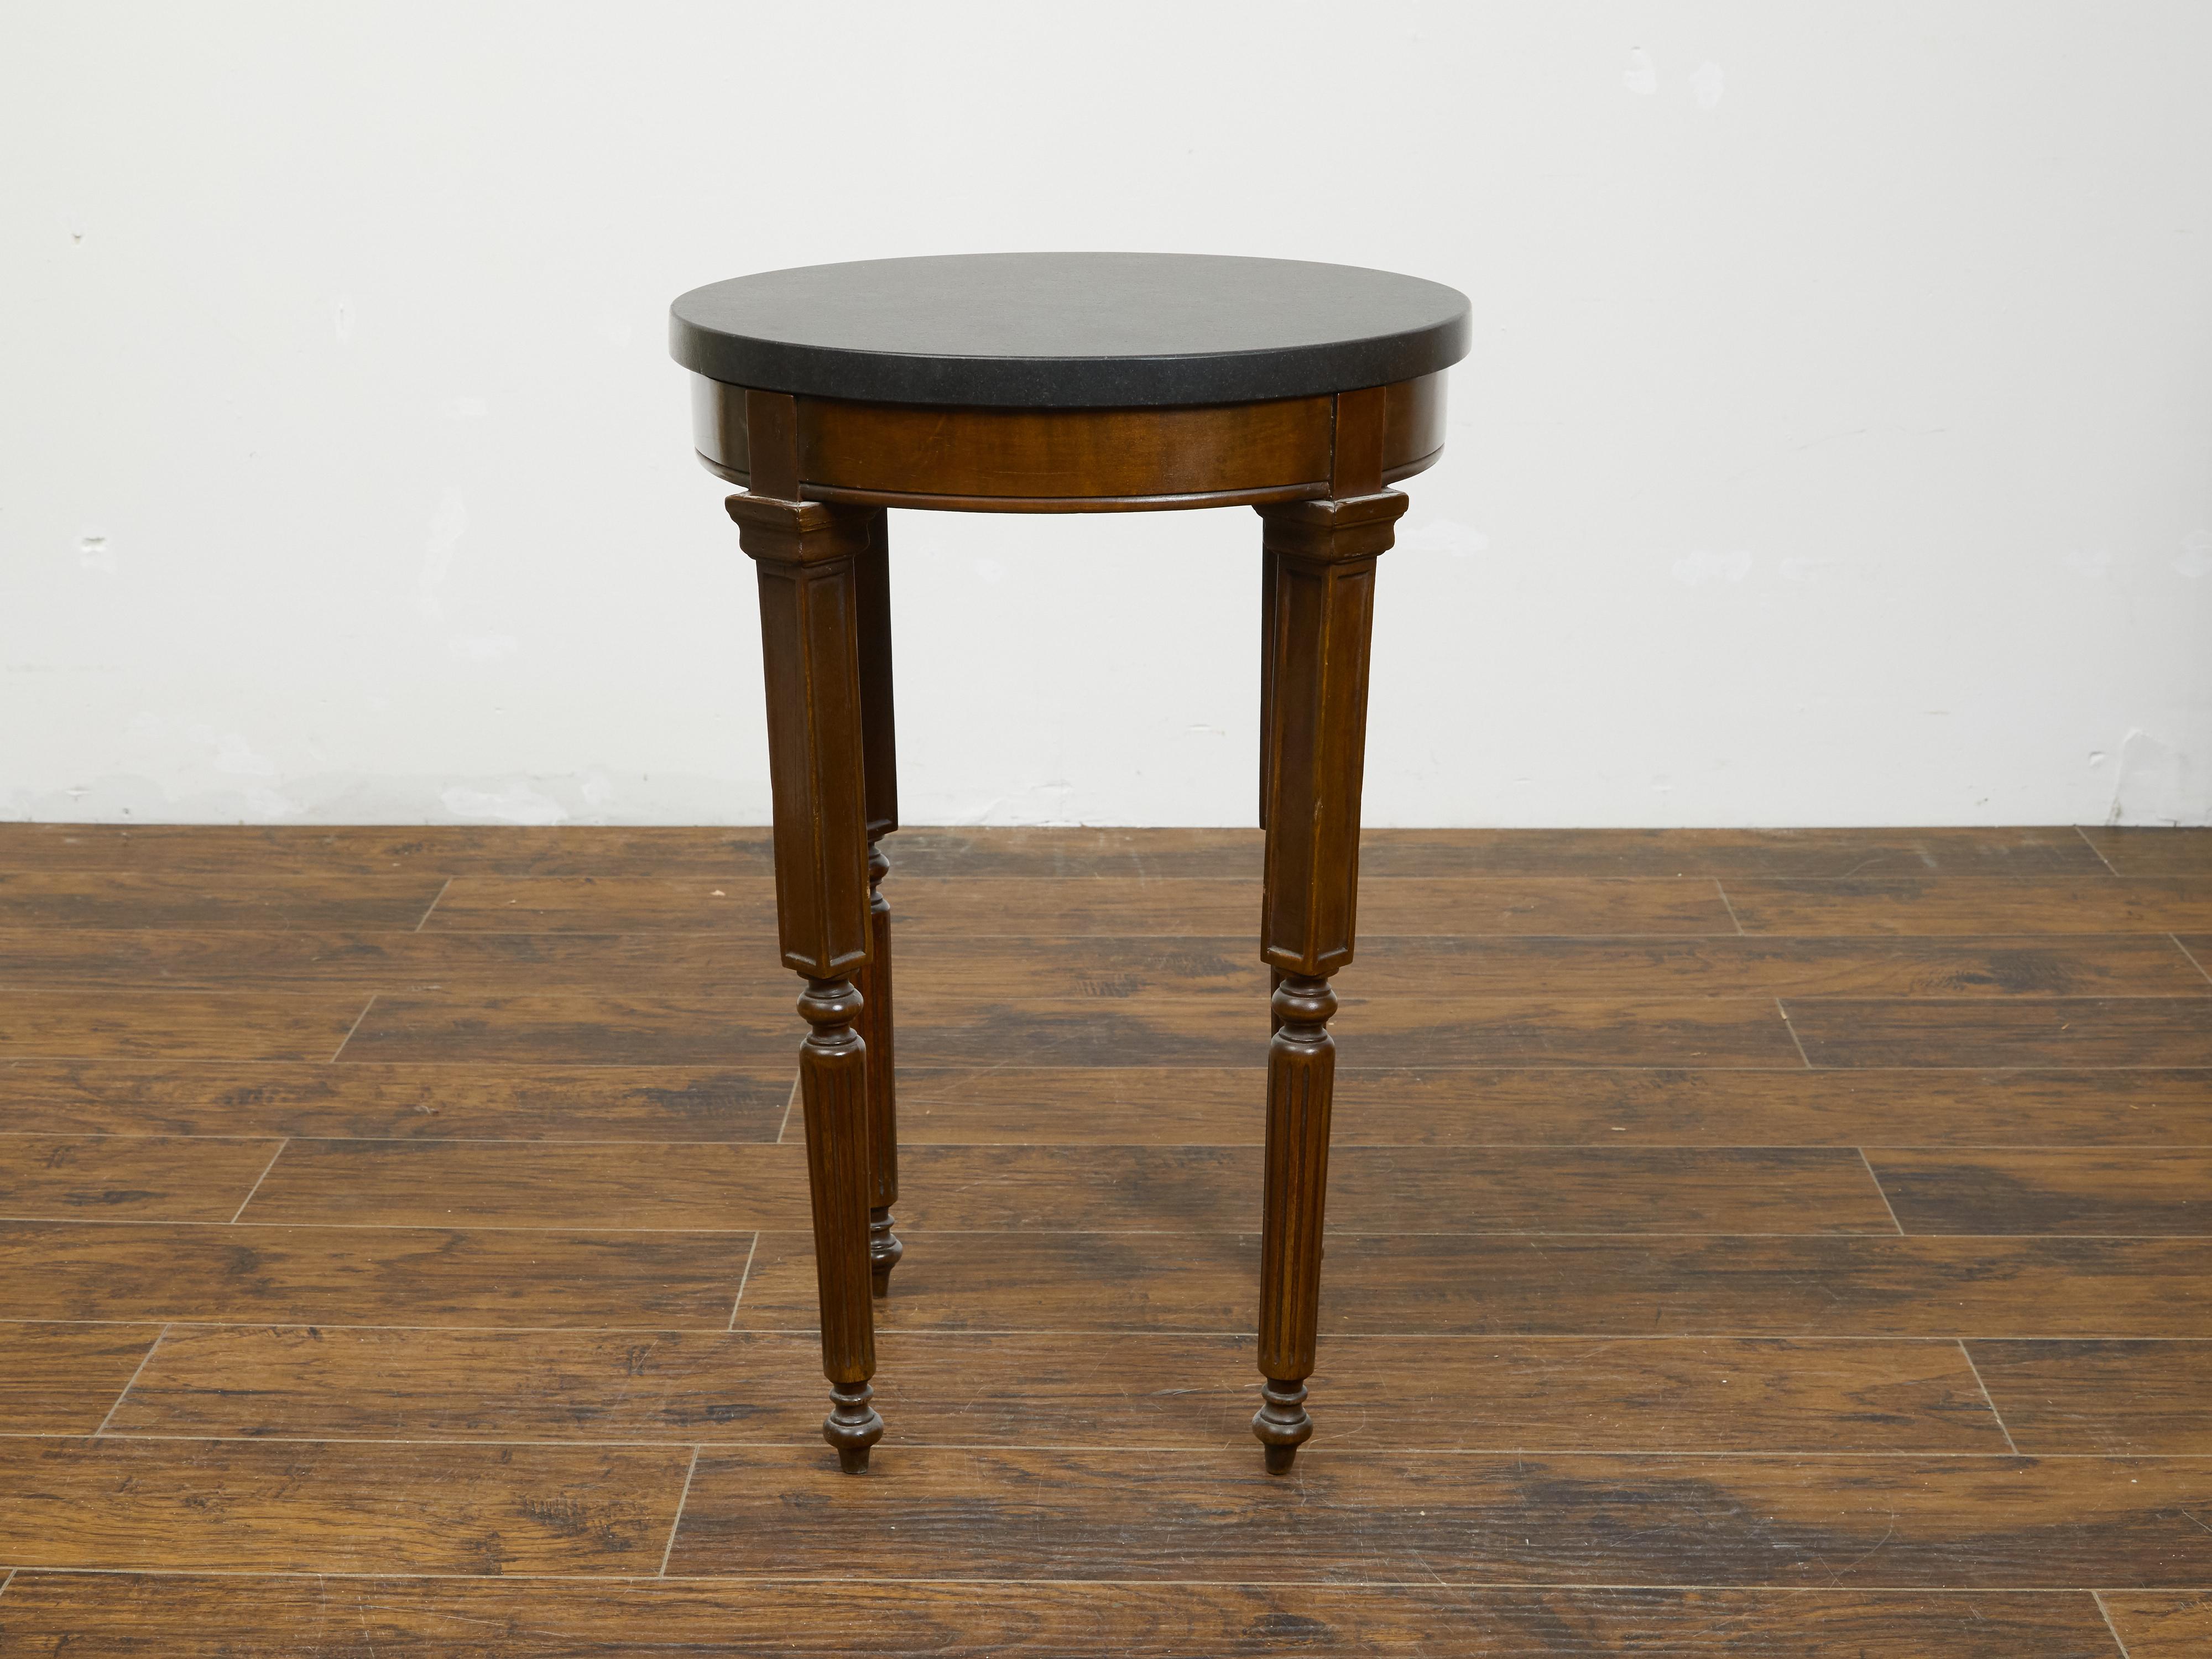 French 19th Century Wooden Guéridon Table with Circular Black Marble Top In Good Condition For Sale In Atlanta, GA